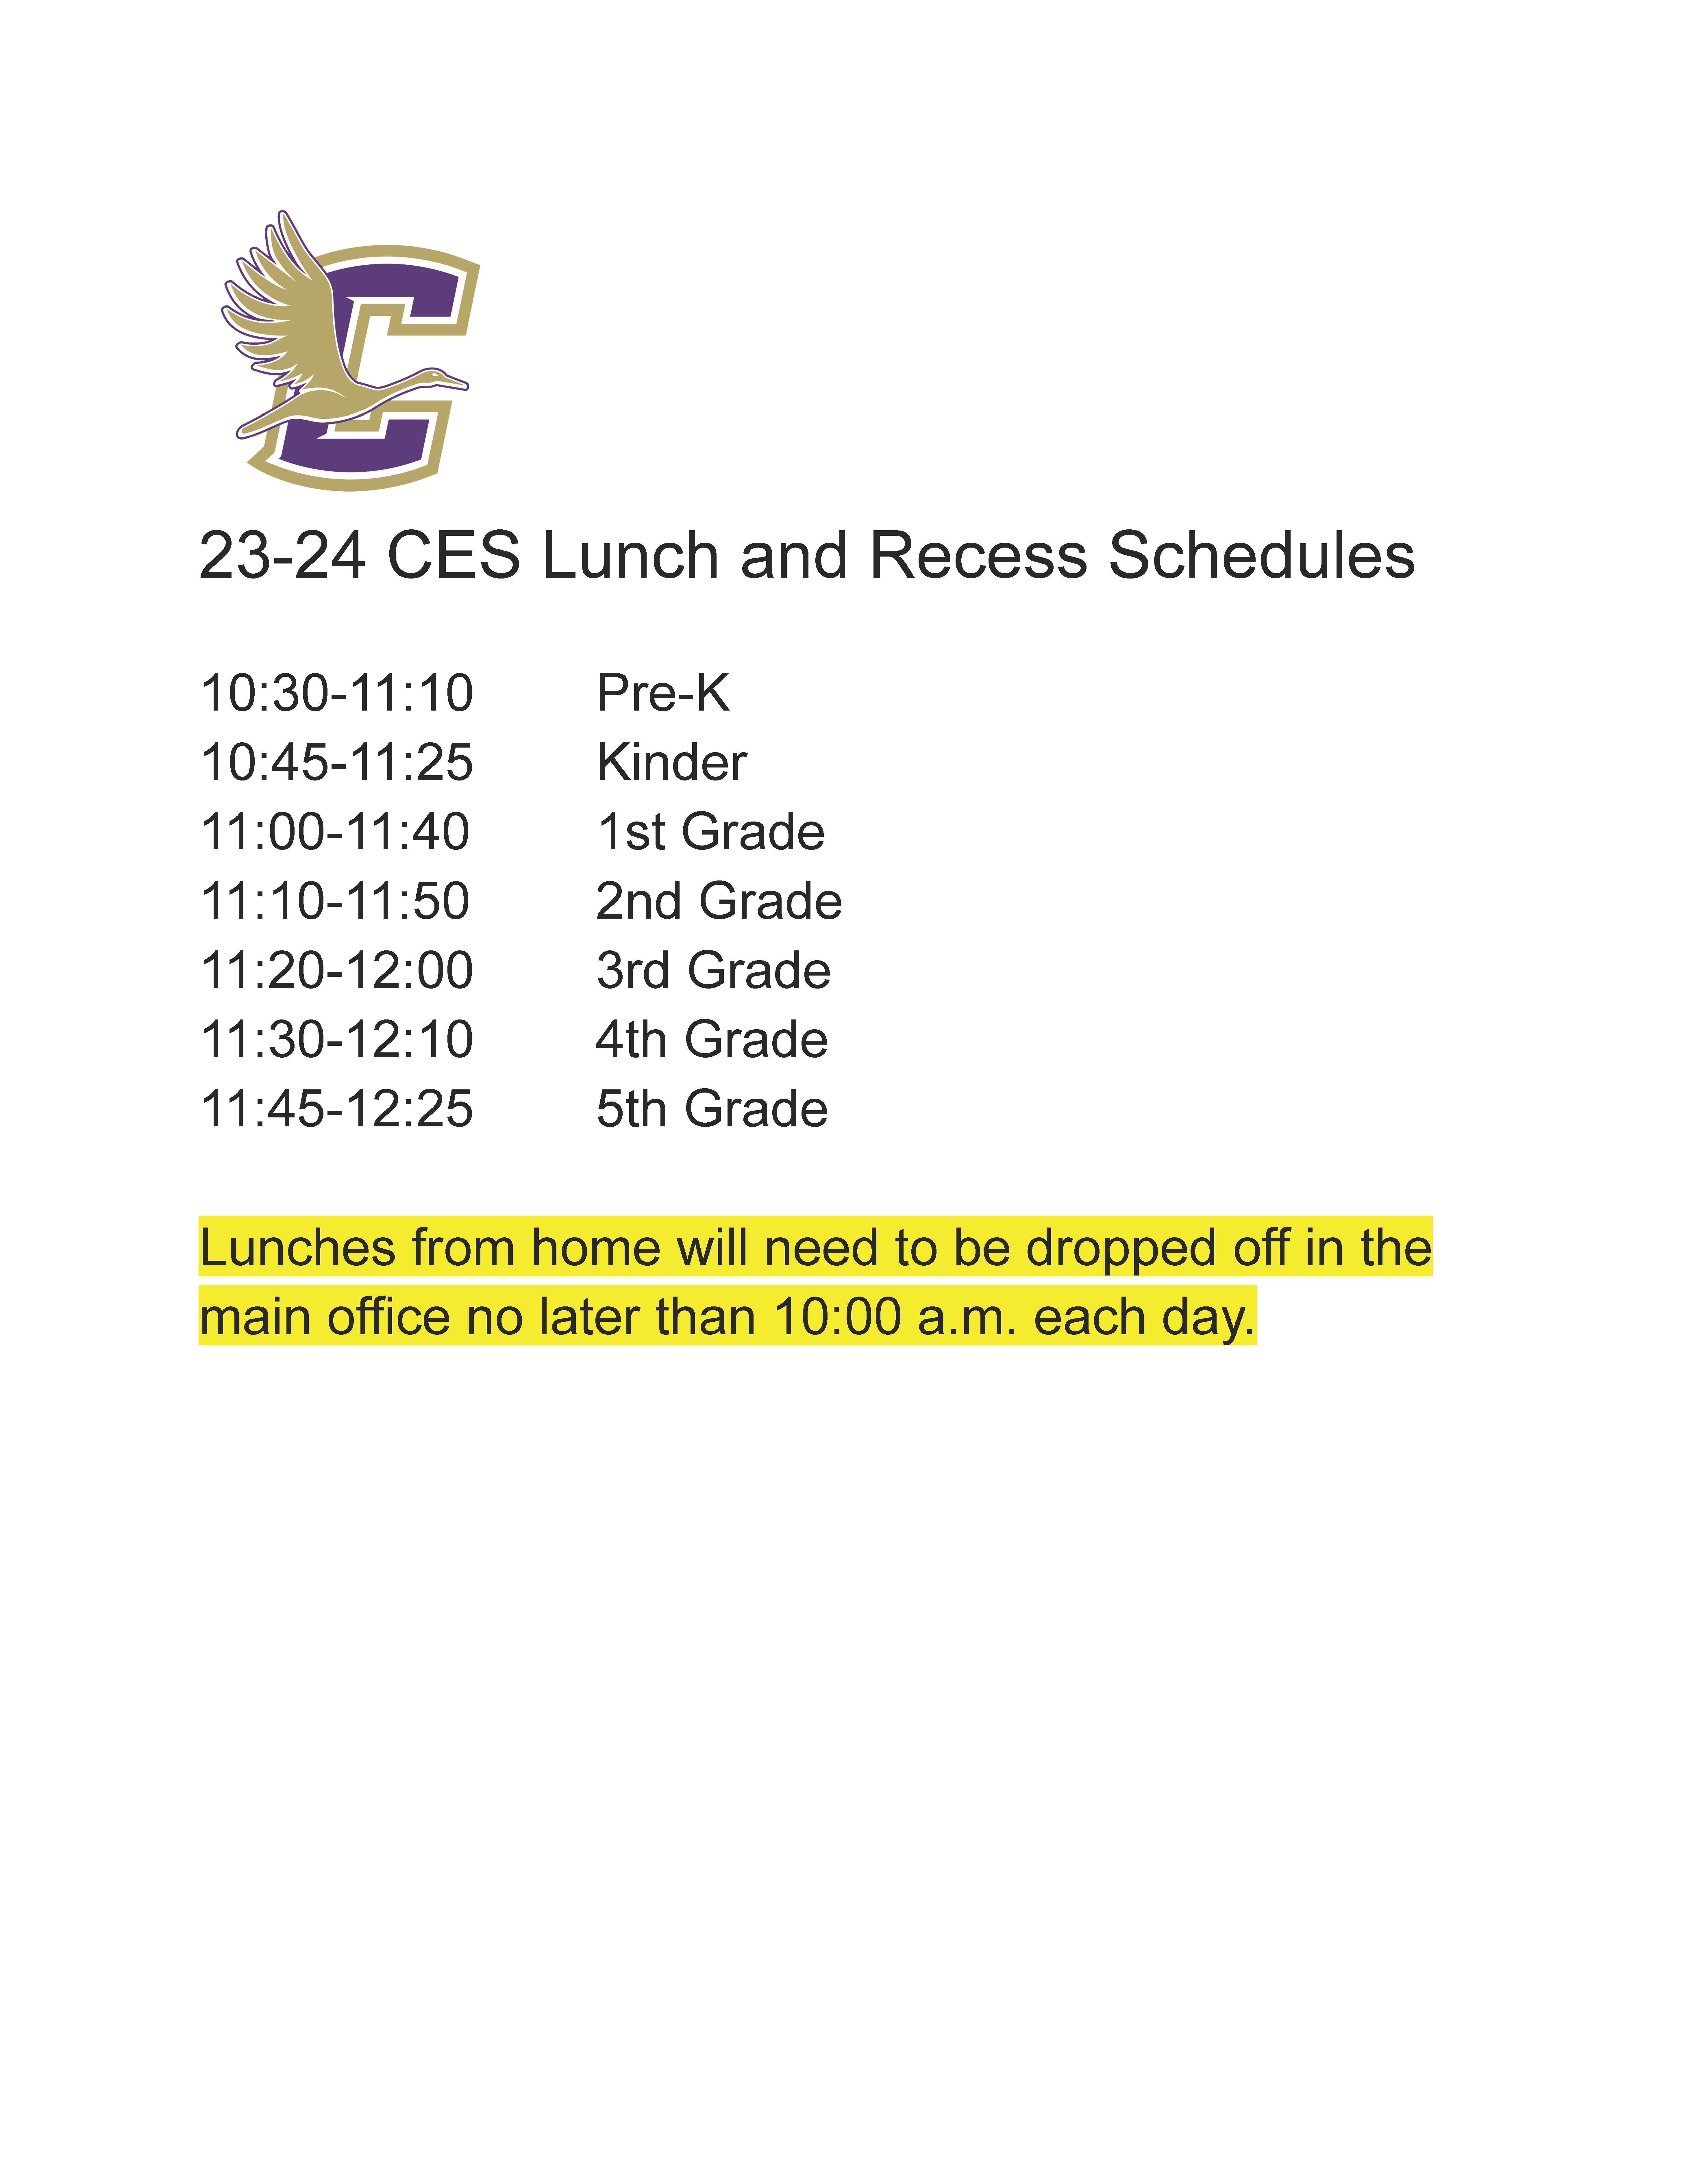 CES Lunch and Recess Schedule